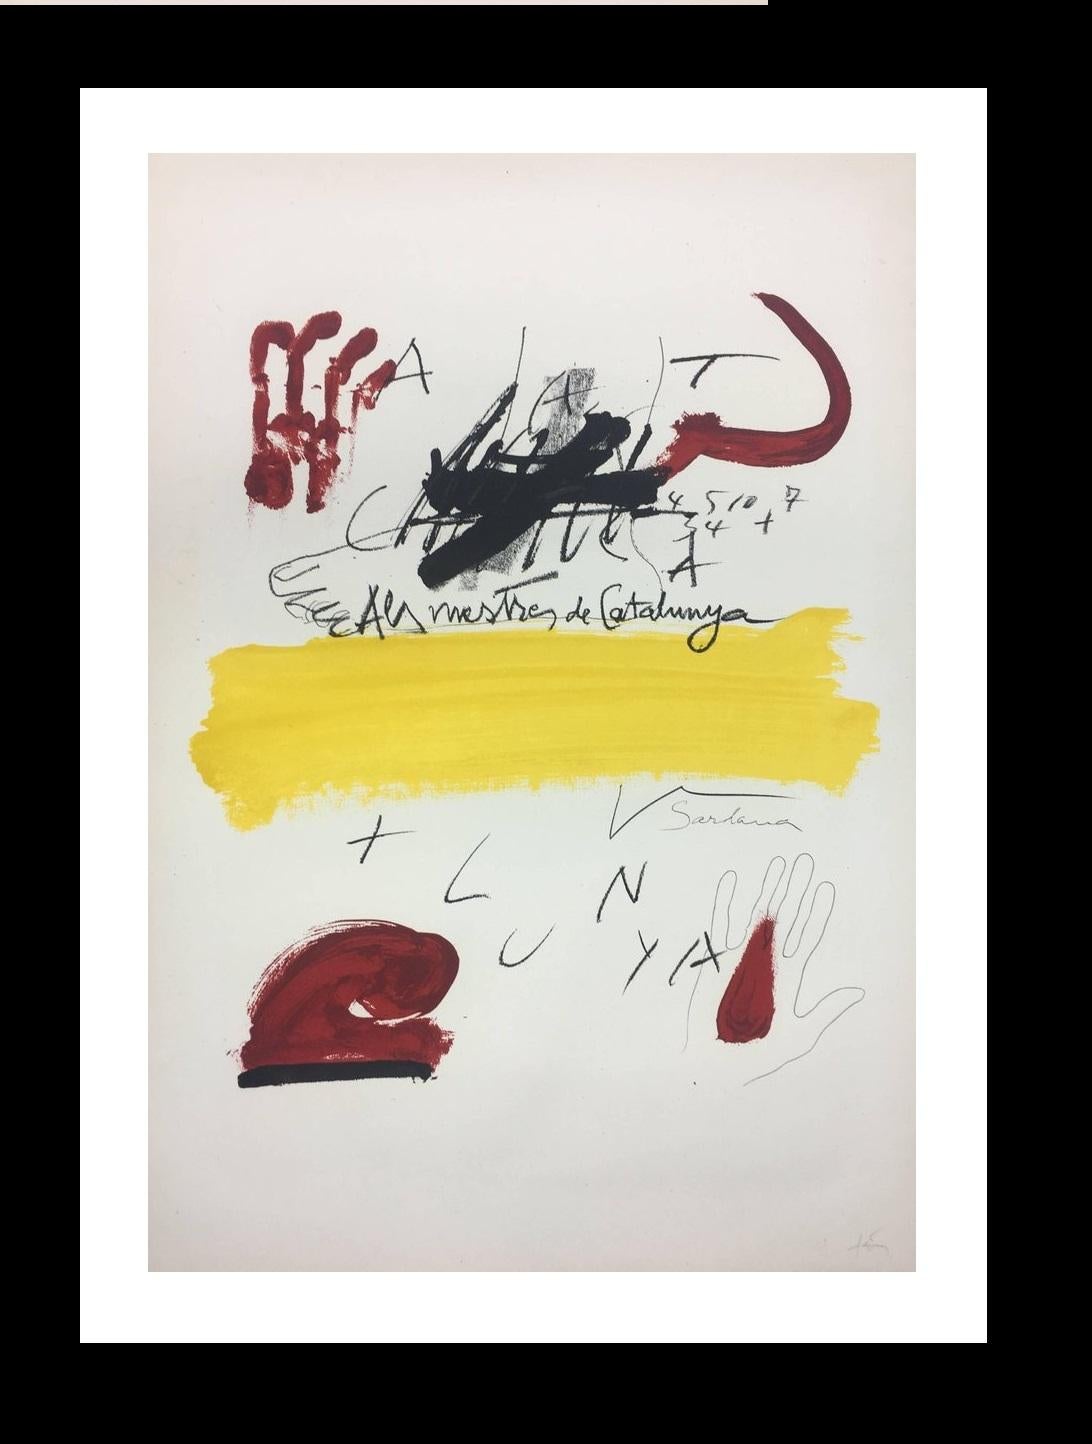 Antoni Tàpies Abstract Print - Tapies 118  White Background  Reds and Yellows  Catalonia.  original lithograph